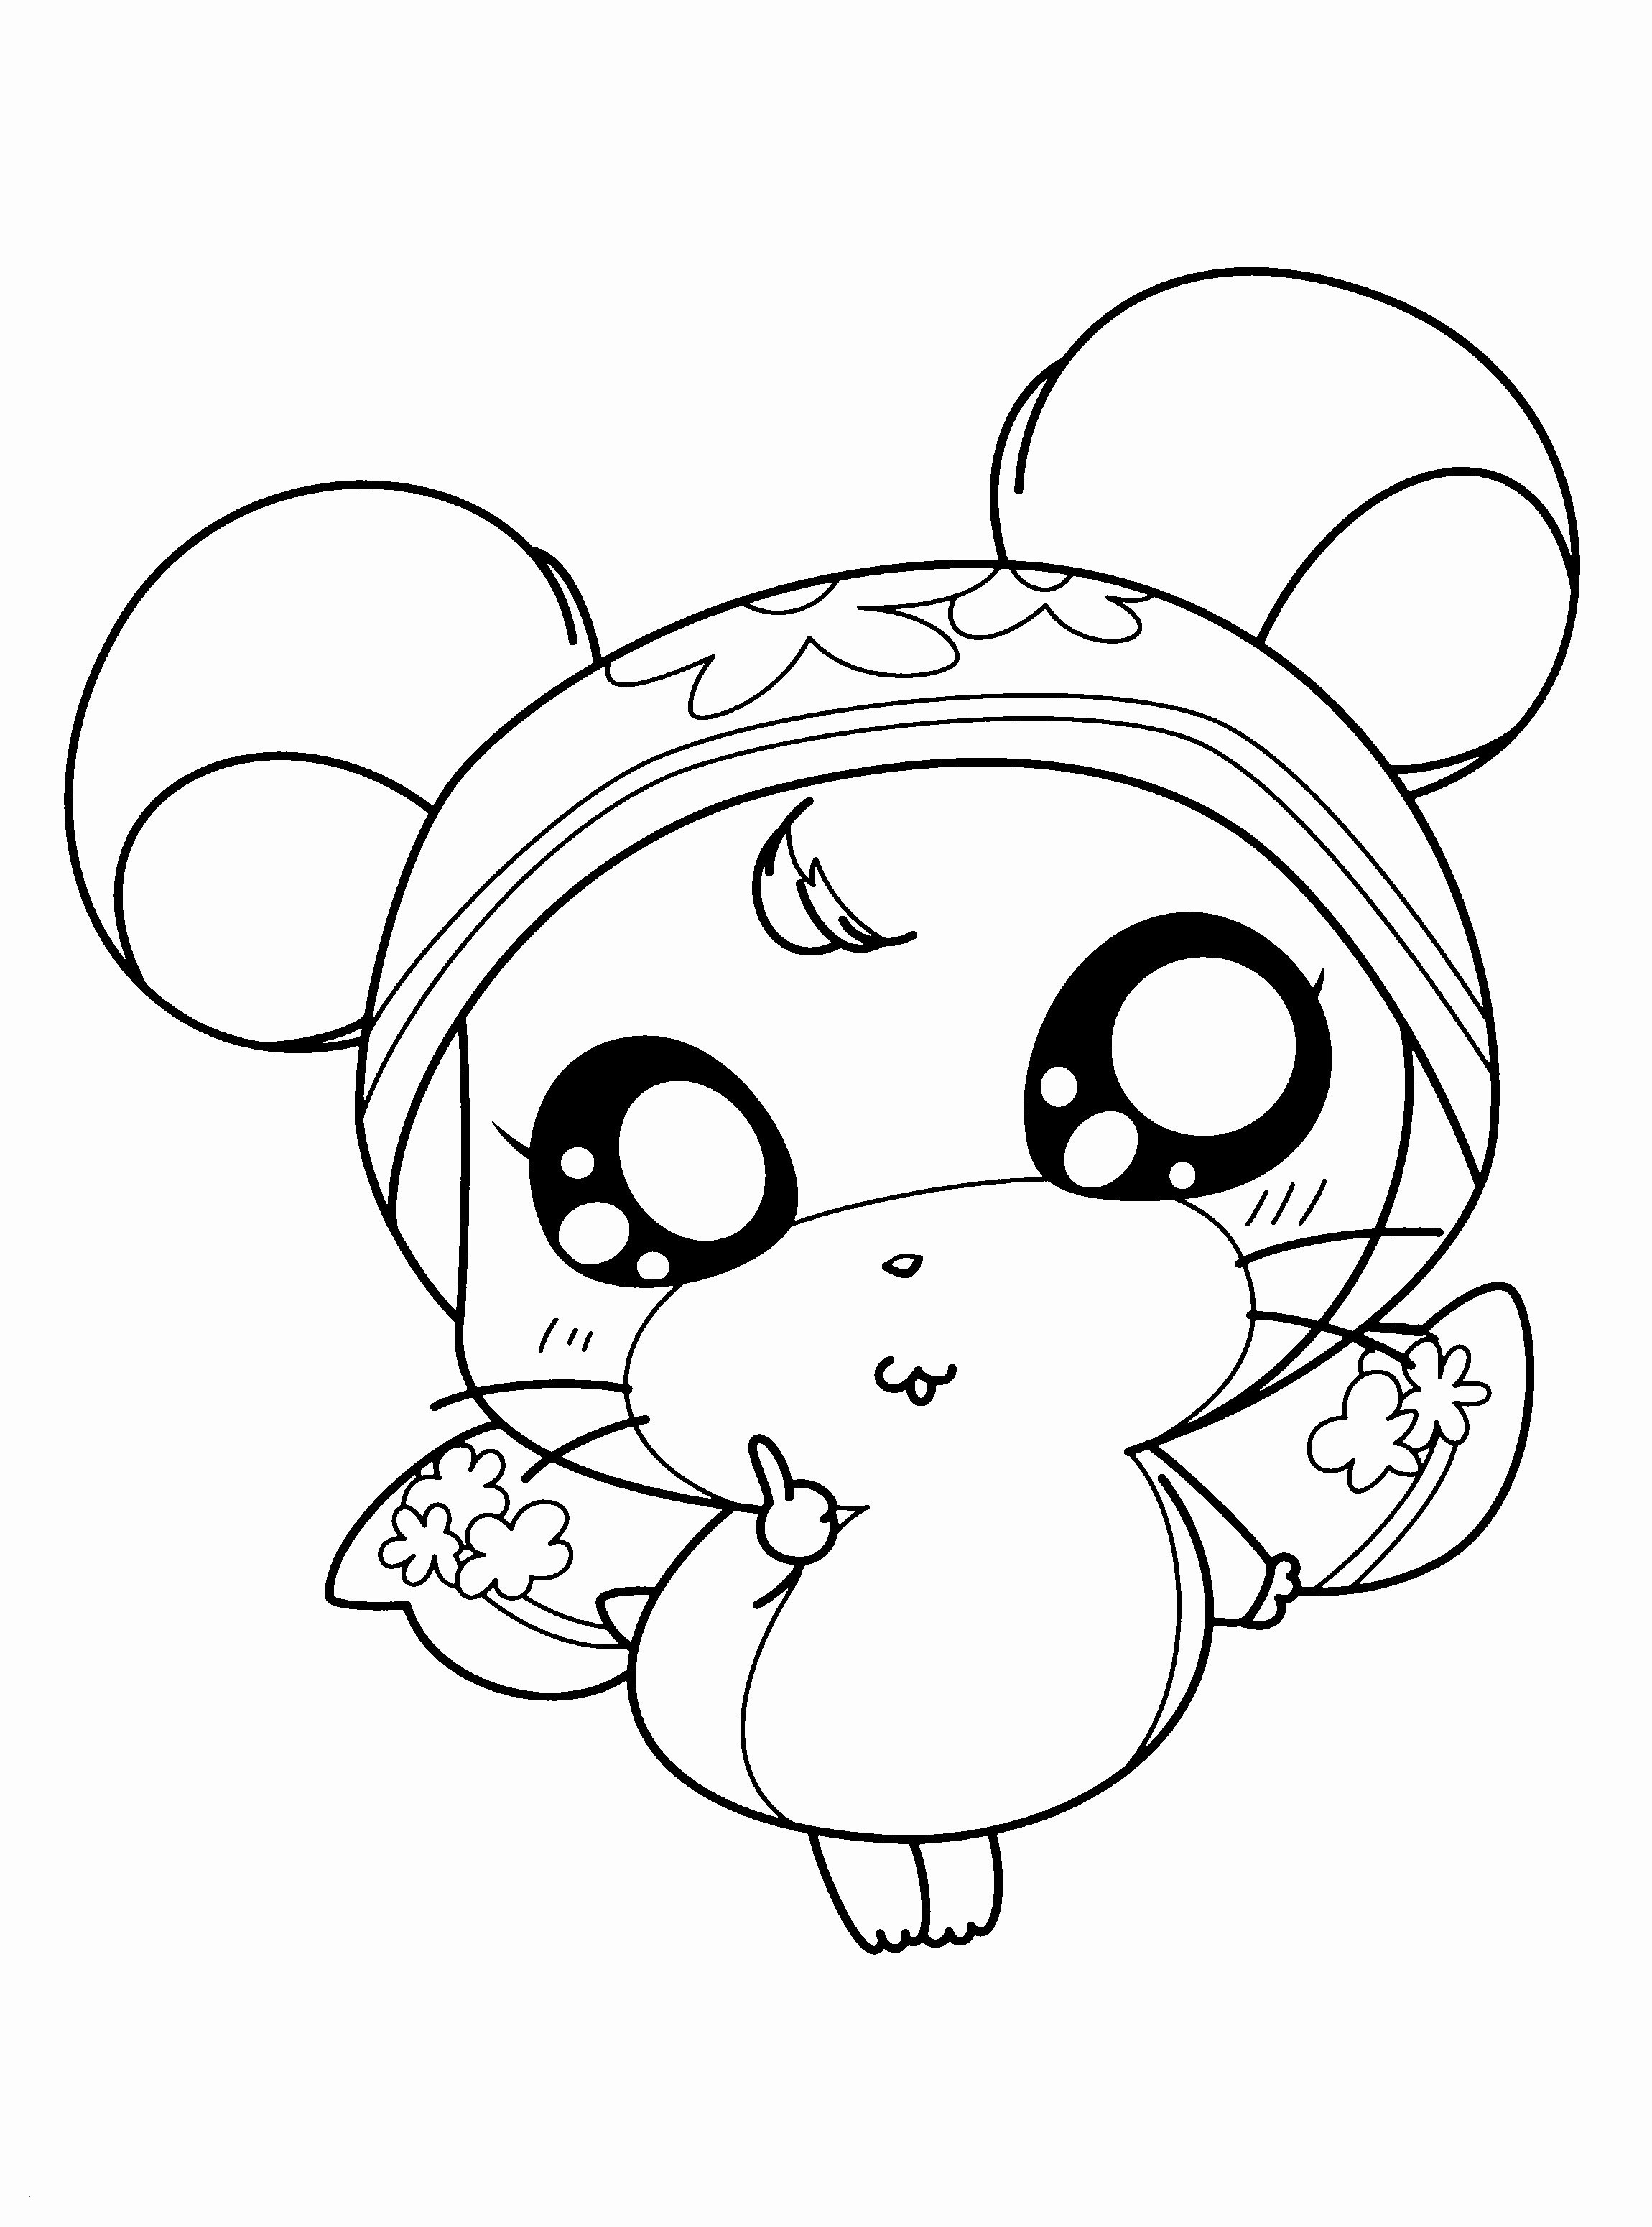 Pokemon Coloring Pages for Kids